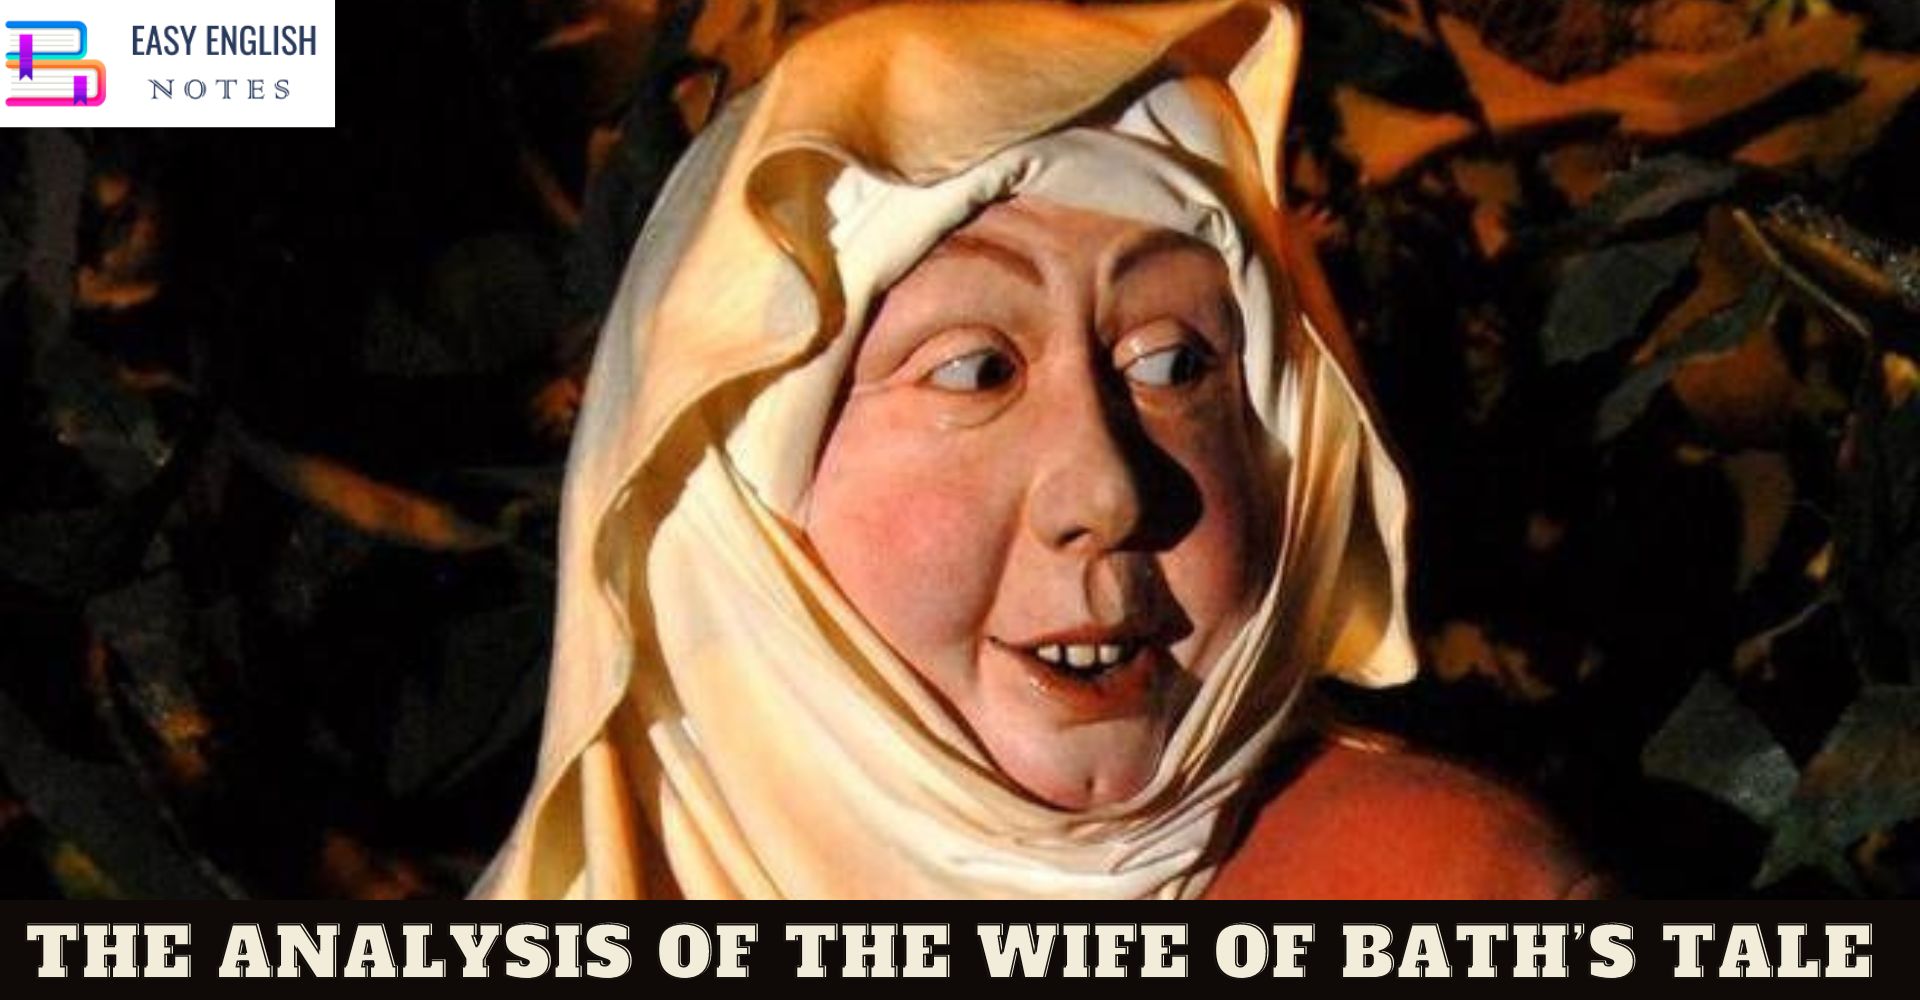 The Analysis of The Wife of Bath’s Tale